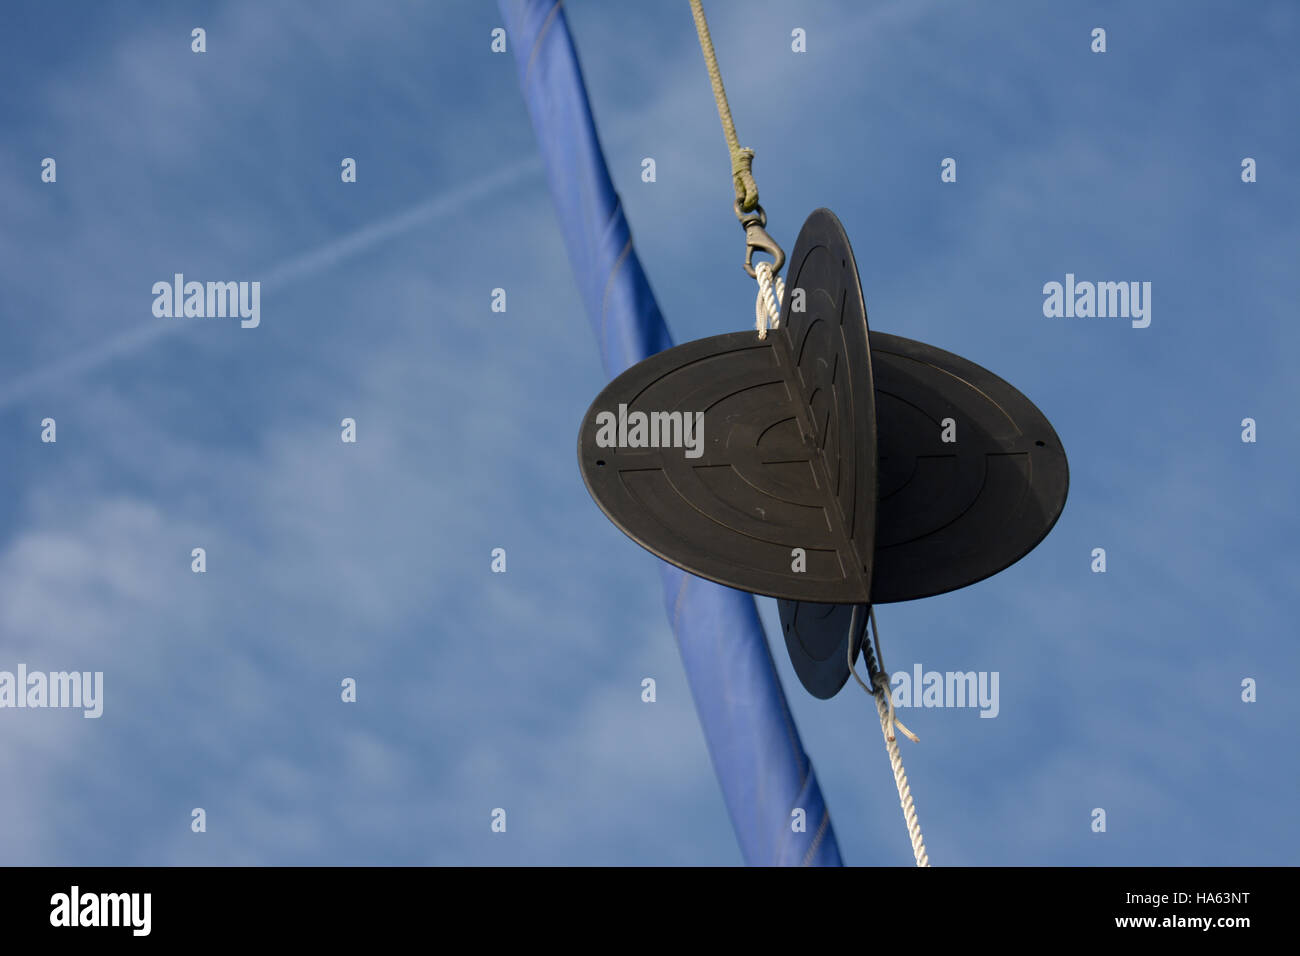 Anchor ball in yachts rigging with rolled blue foresail against a blue sky with white clouds Stock Photo